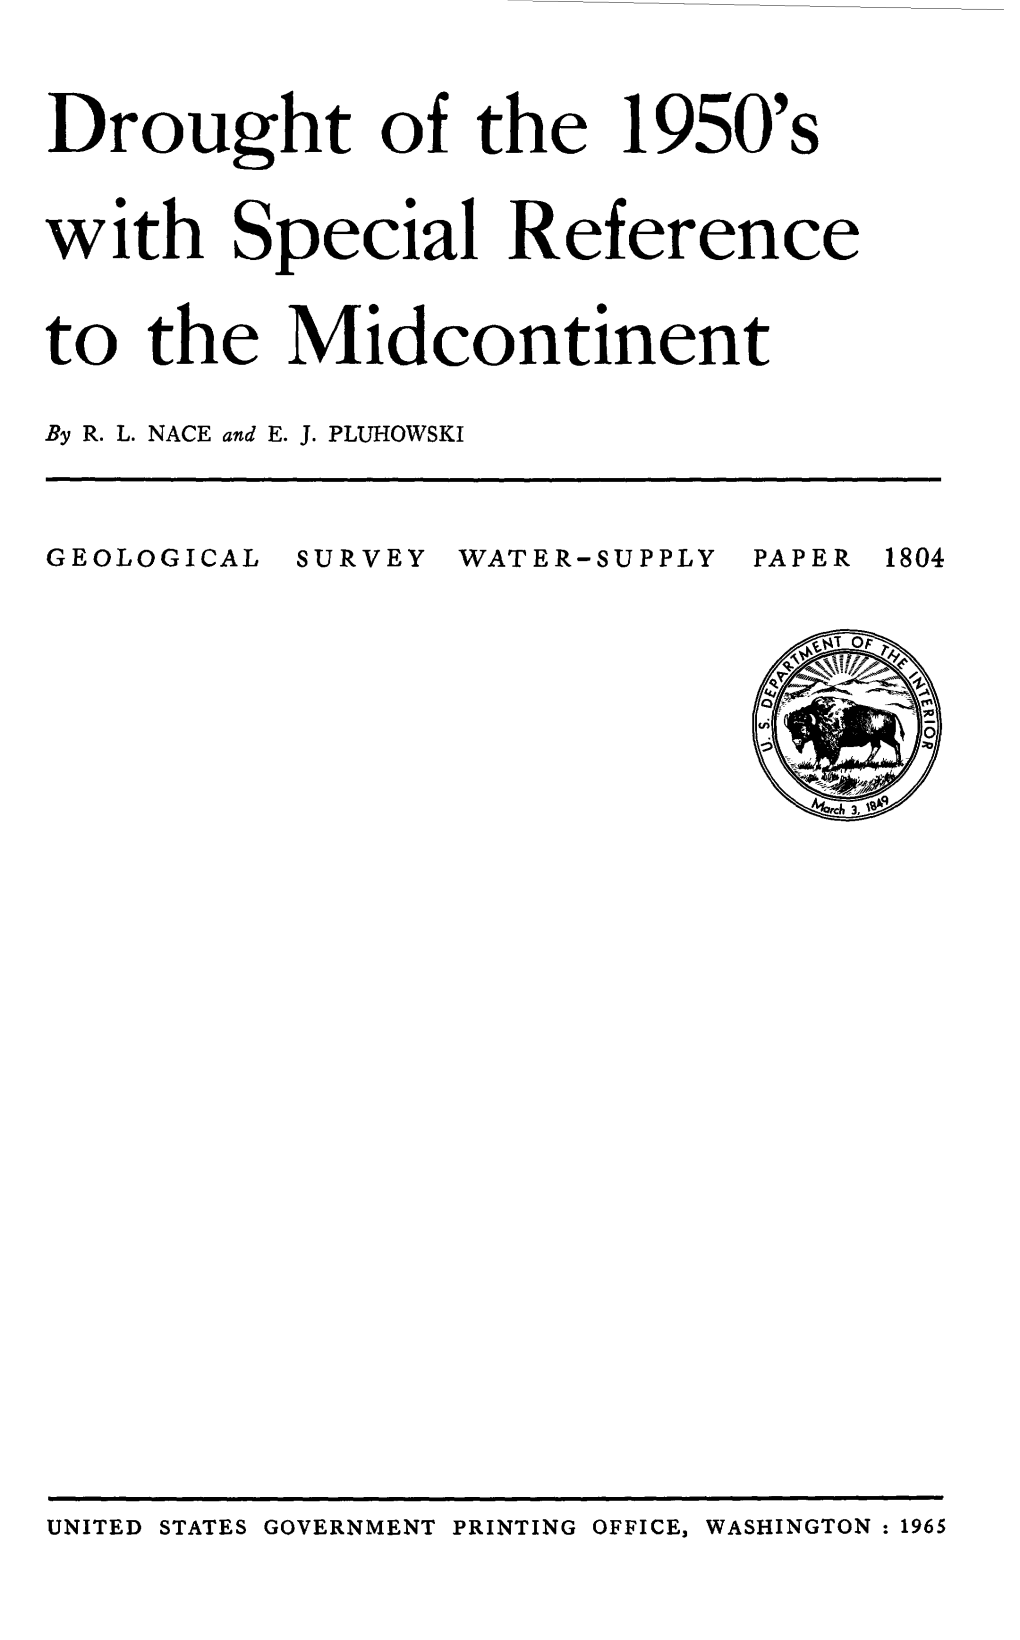 Drought of the 1950'S with Special Reference to the Midcontinent